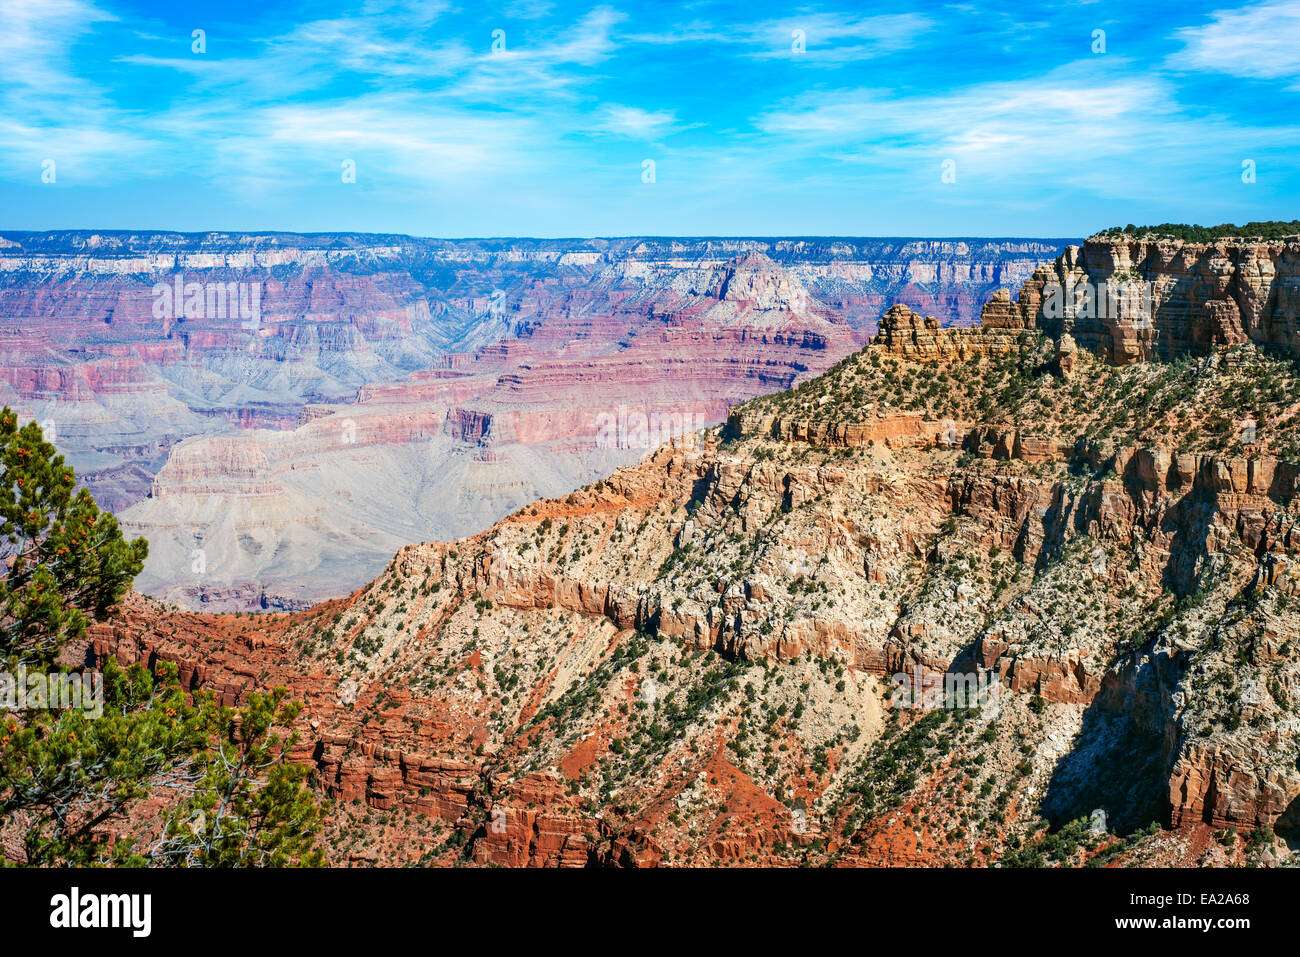 View from the south rim of the Grand Canyon on a beautiful sunny day Stock Photo